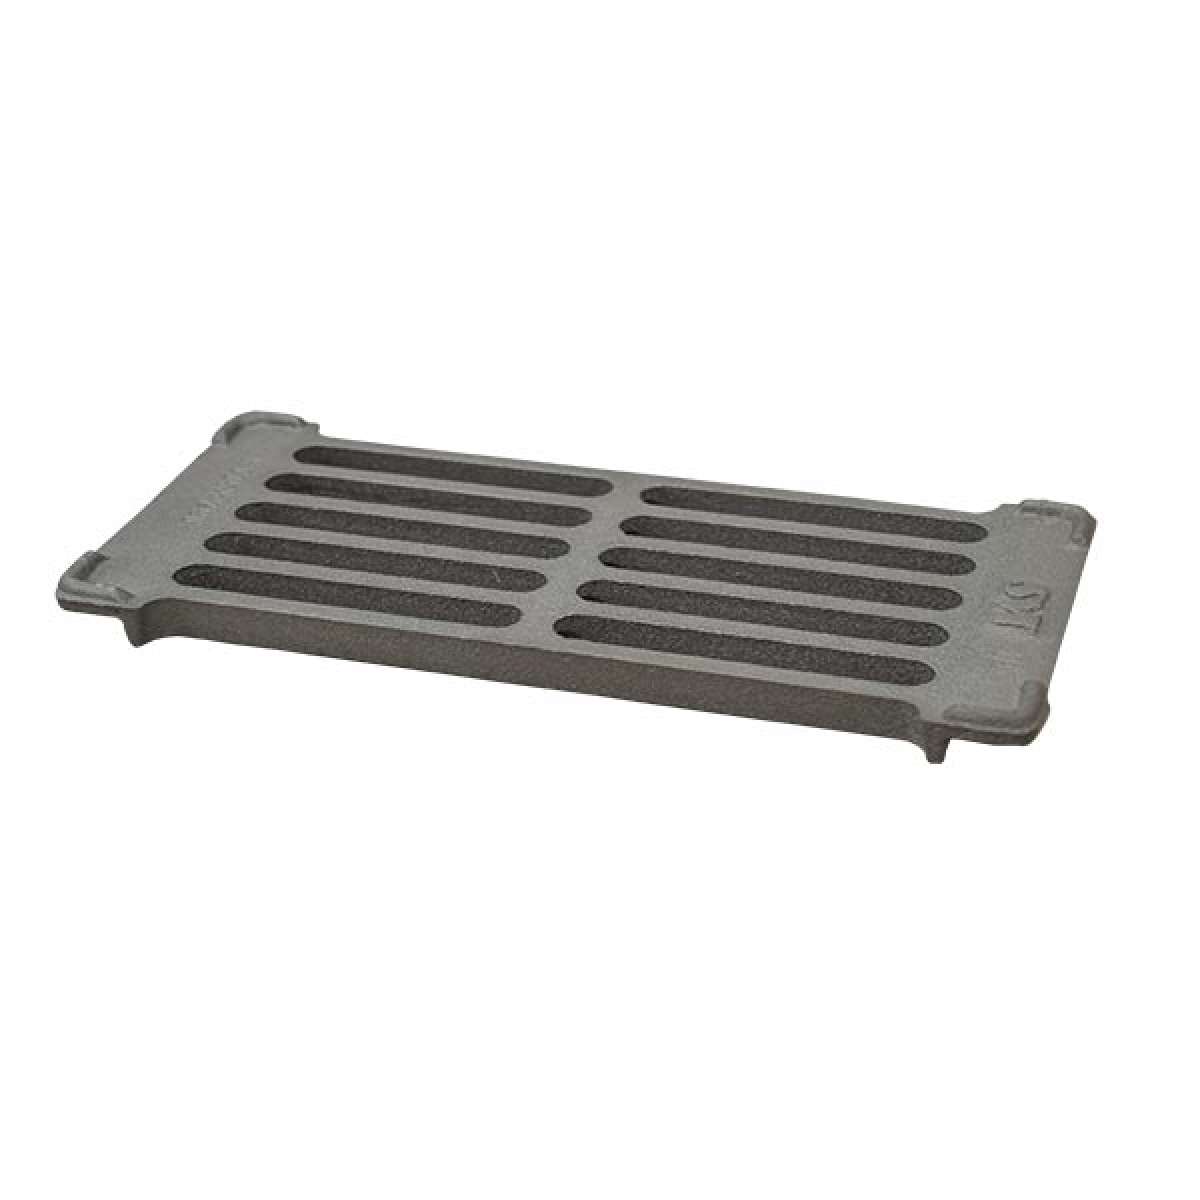 Ash grate for outdoor oven